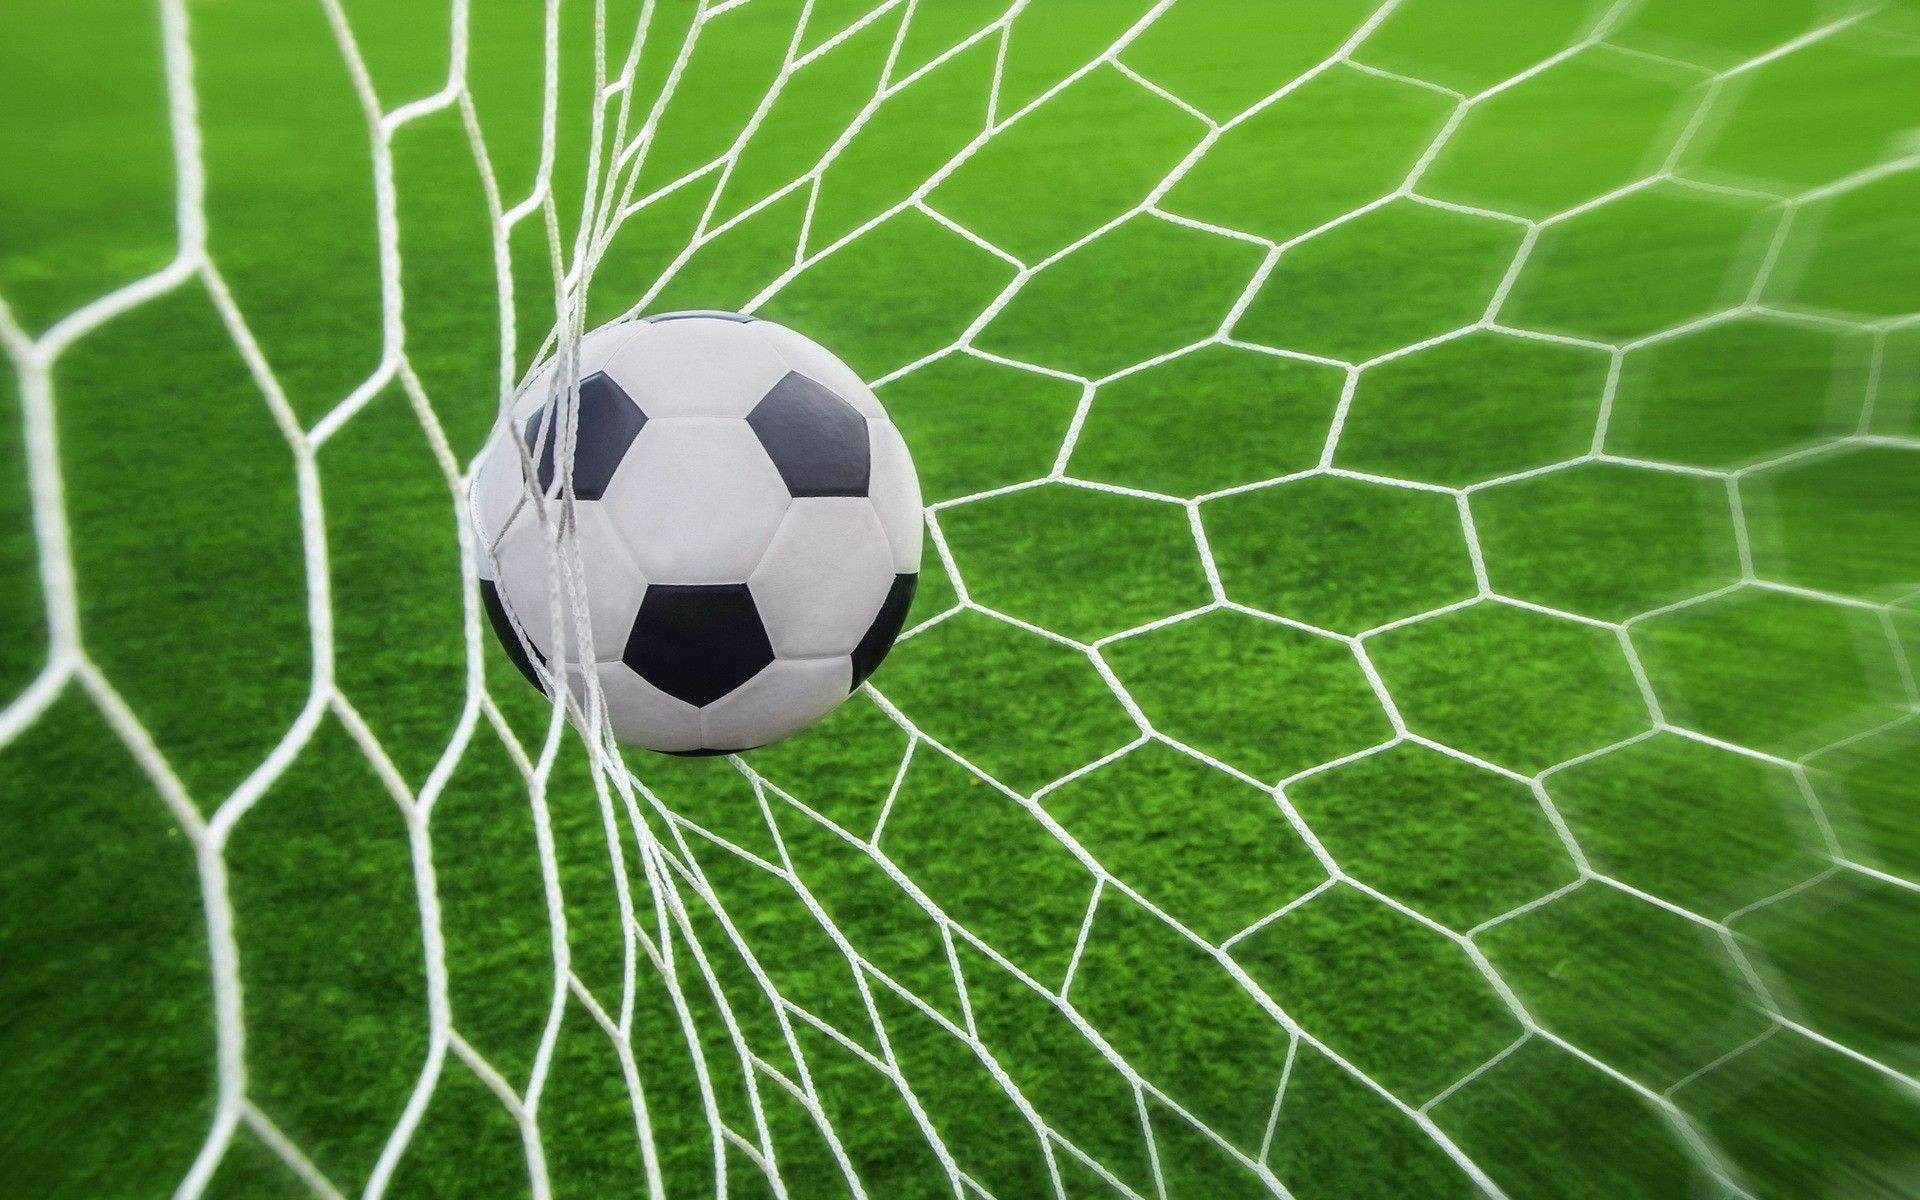 sports, Sport, Soccer, Soccer Pitches, Ball, Nets, Depth Of Field